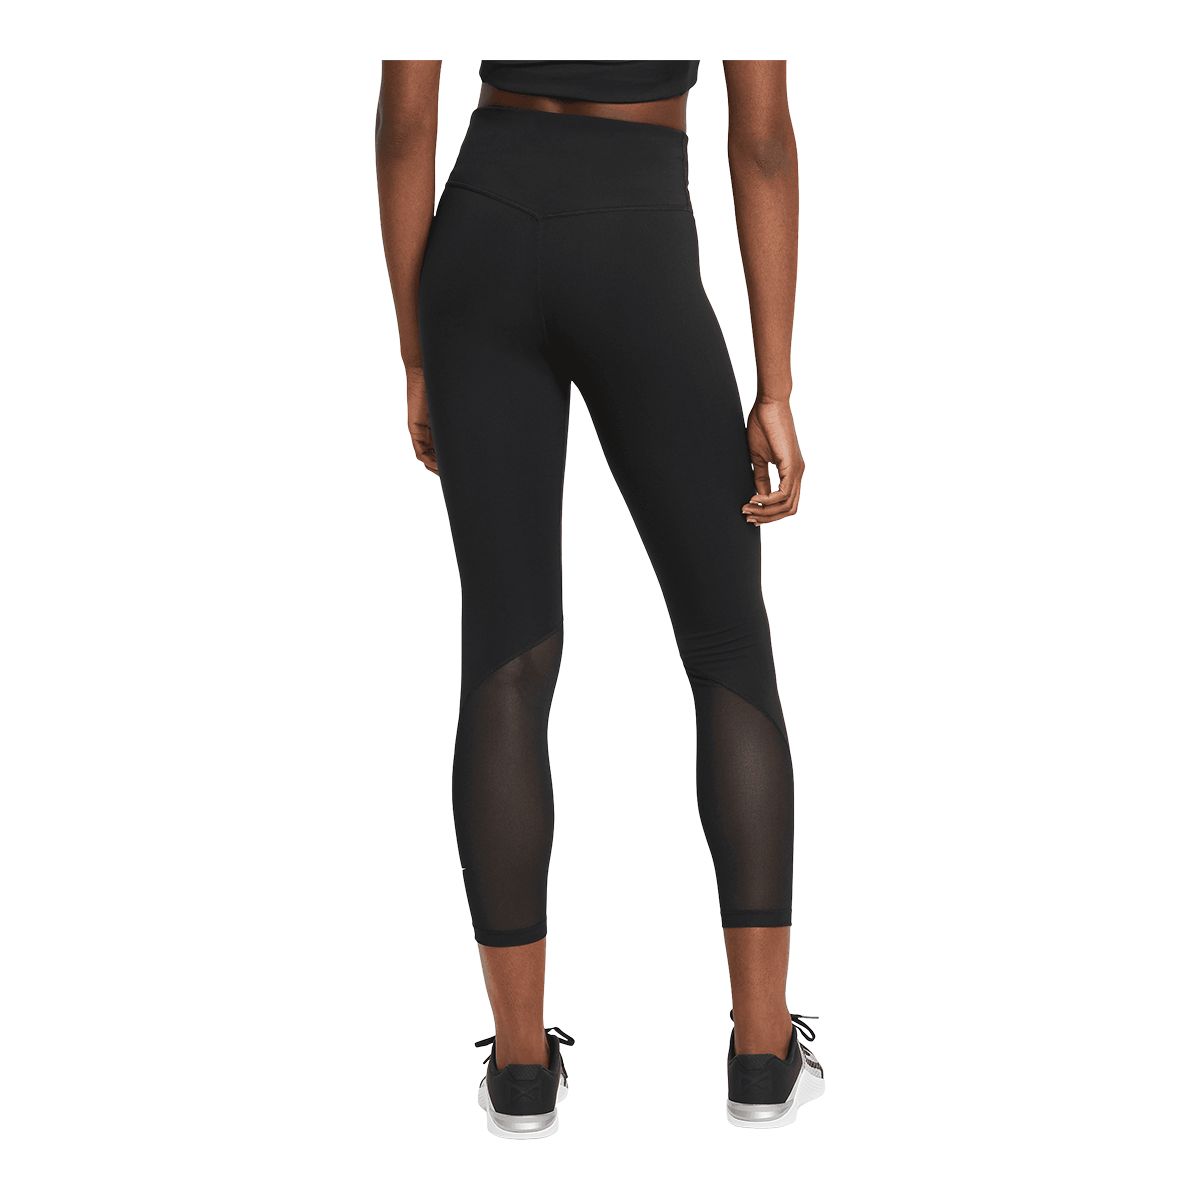 https://media-www.sportchek.ca/product/div-03-softgoods/dpt-70-athletic-clothing/sdpt-02-womens/334078174/nike-w-one-df-mr-7-8-tight-9f69f06a-299a-47b7-8b41-ab4658282b48-jpgrendition.jpg?imdensity=1&imwidth=1244&impolicy=mZoom